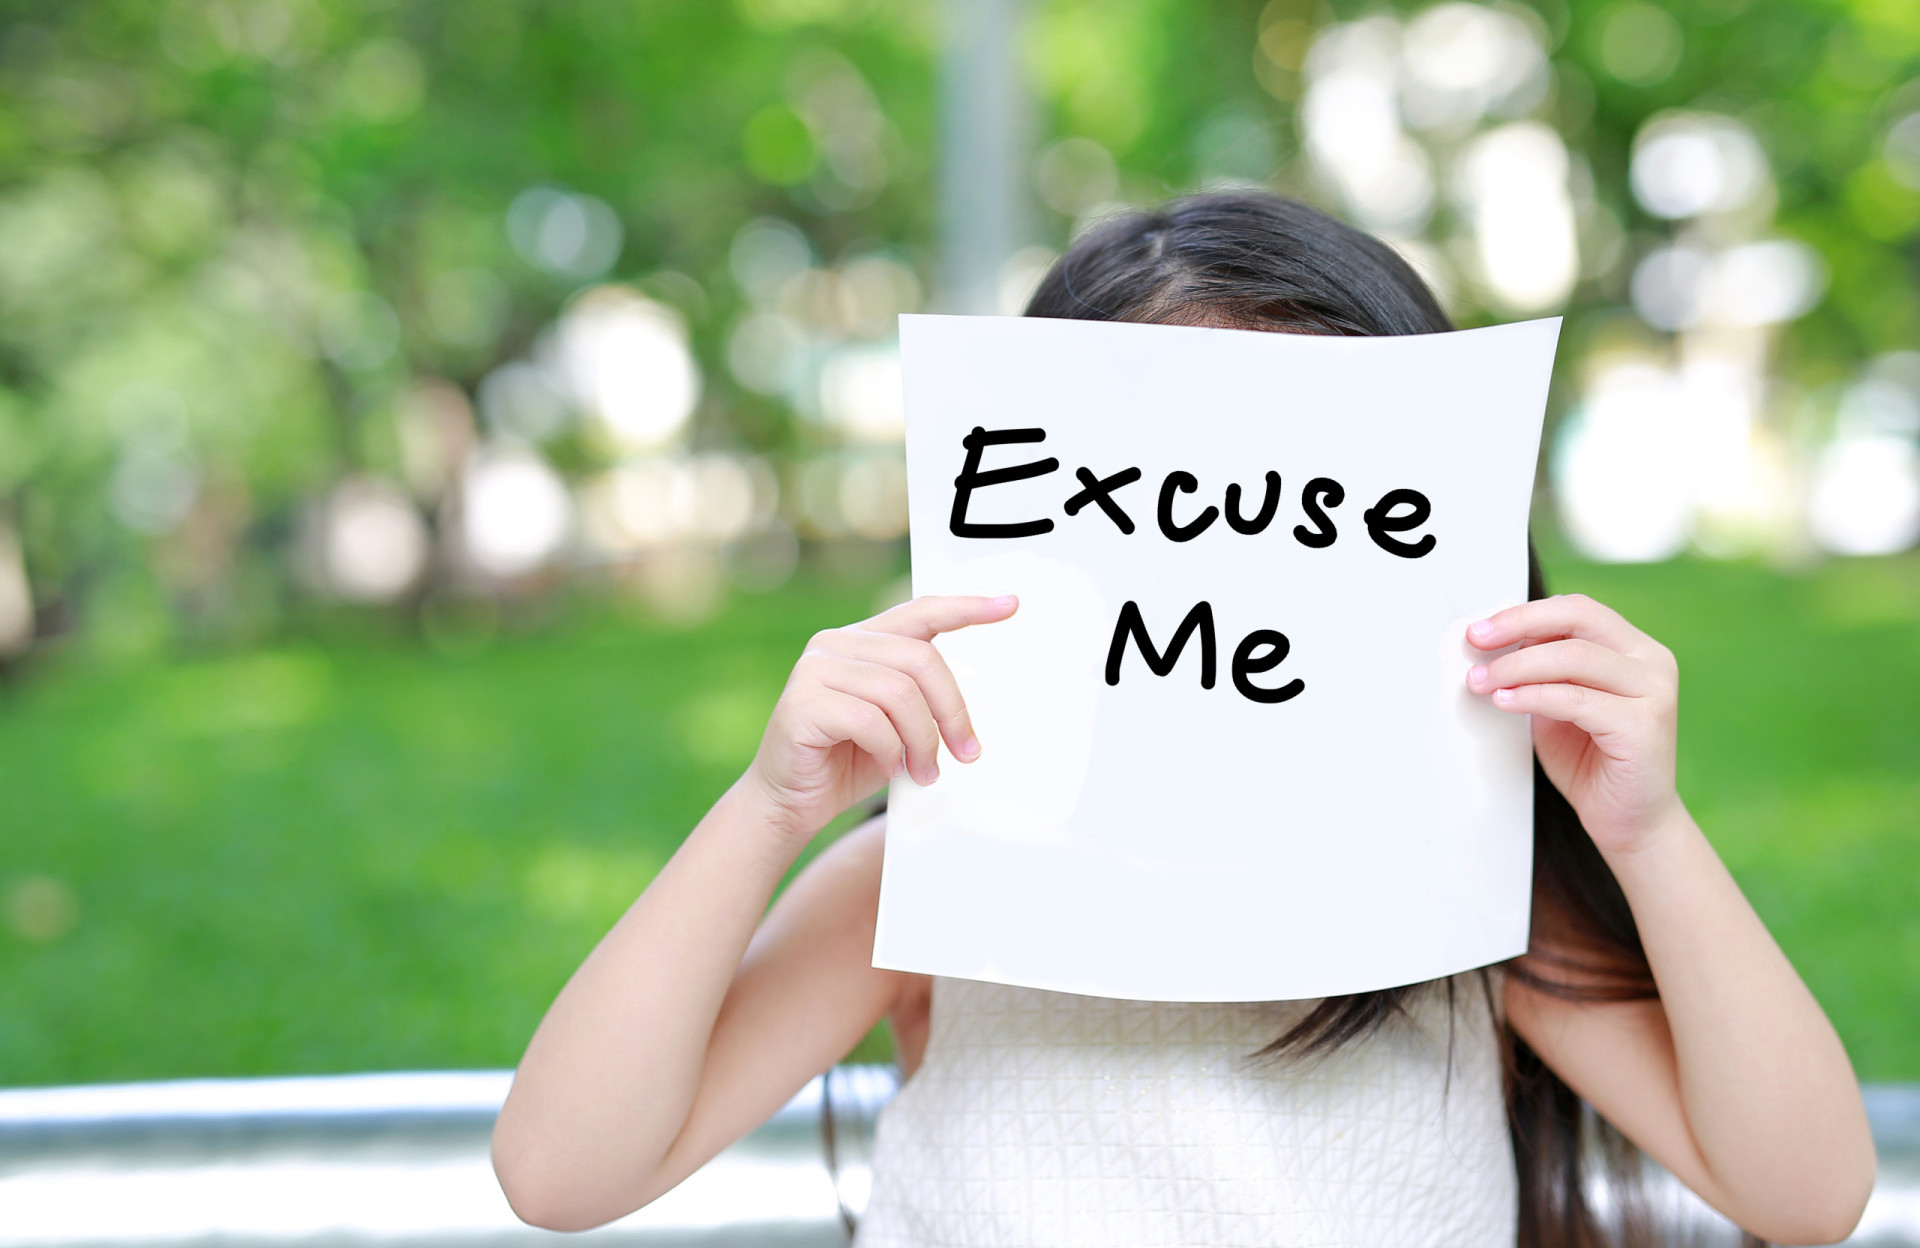 <p>Teaching children to say "excuse me" in crowded spaces is a simple act of politeness. It helps them navigate through busy places while showing consideration for others.</p><p><a href="https://www.msn.com/en-us/community/channel/vid-7xx8mnucu55yw63we9va2gwr7uihbxwc68fxqp25x6tg4ftibpra?cvid=94631541bc0f4f89bfd59158d696ad7e">Follow us and access great exclusive content every day</a></p>